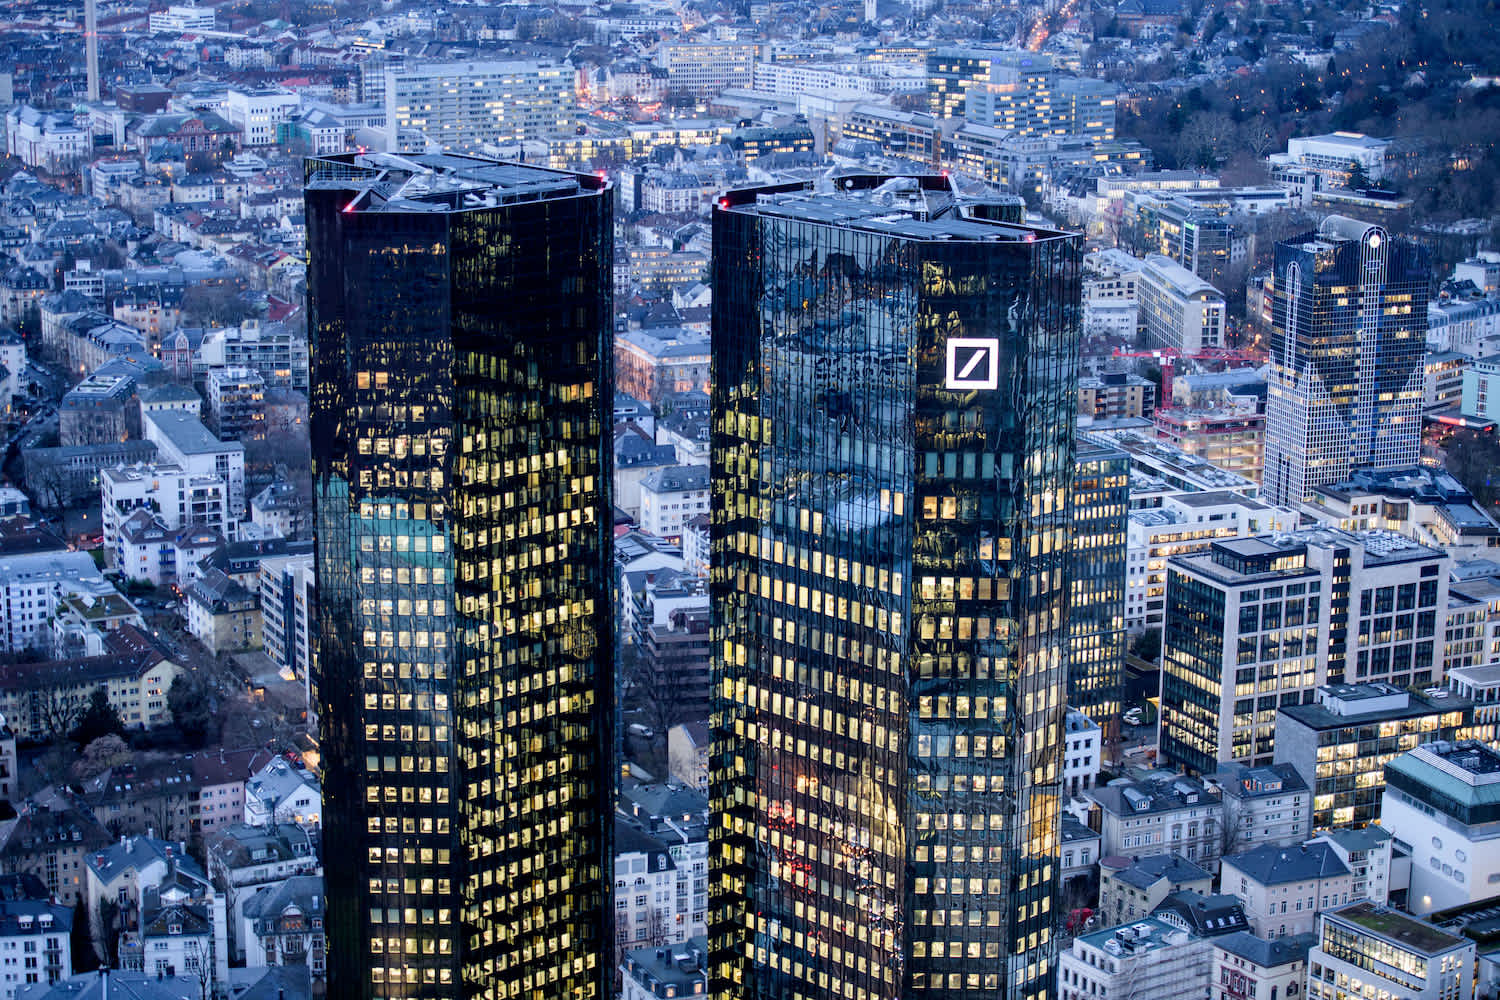 Deutsche Bank Now Only Works with Vendors having a High ESG Rating